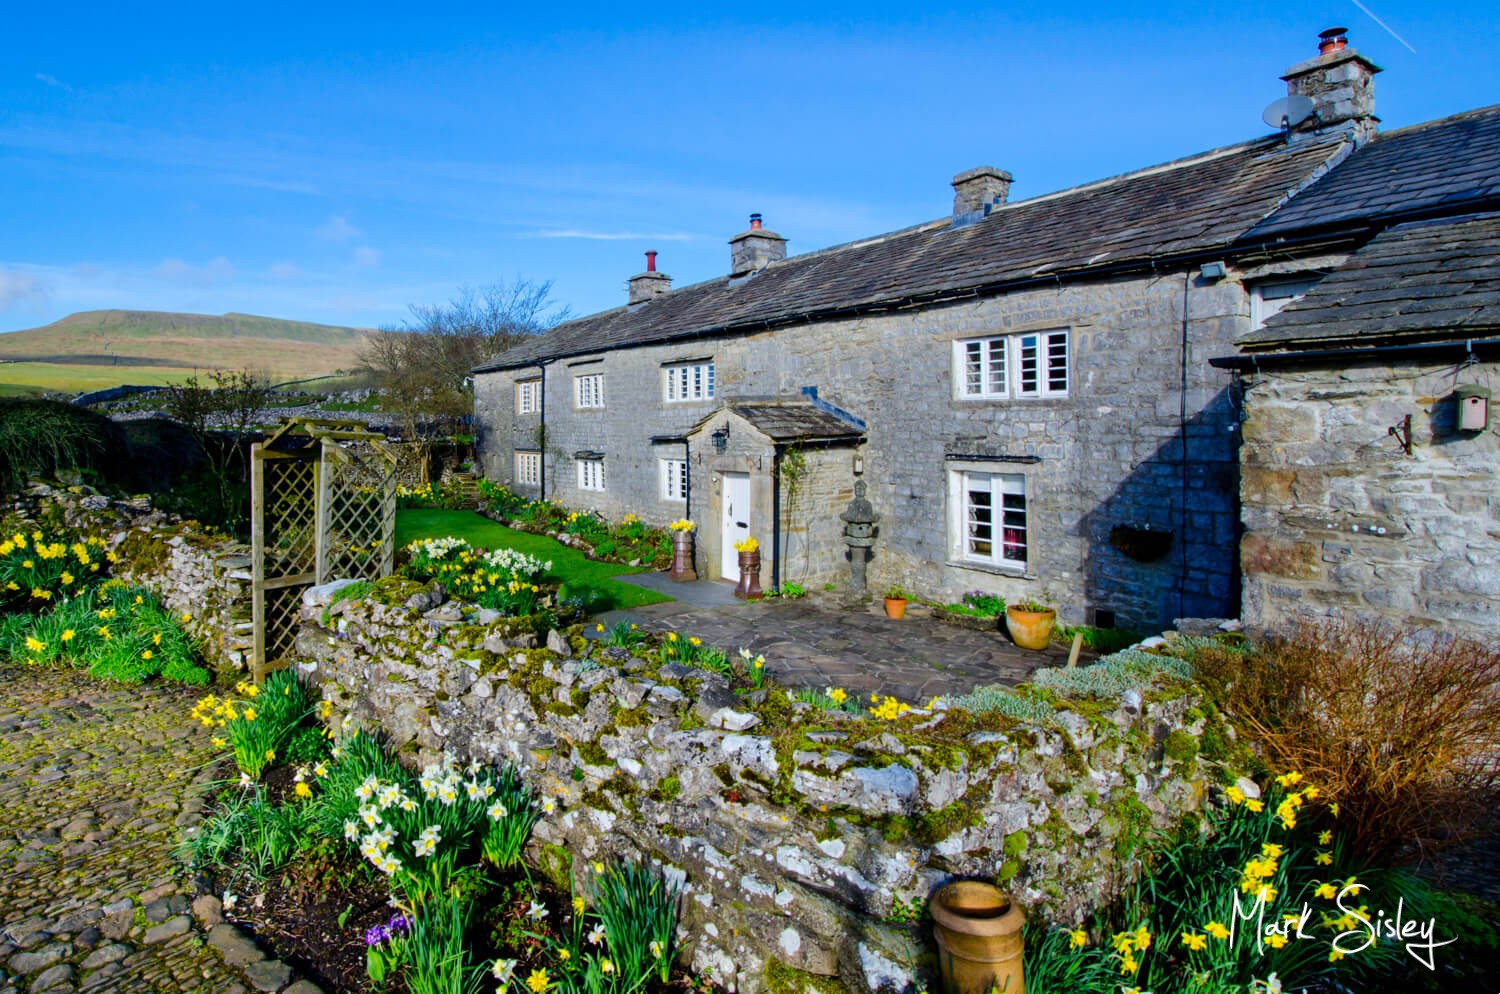 UK Holiday home interiors & exteriors photography in the Yorkshire Dales